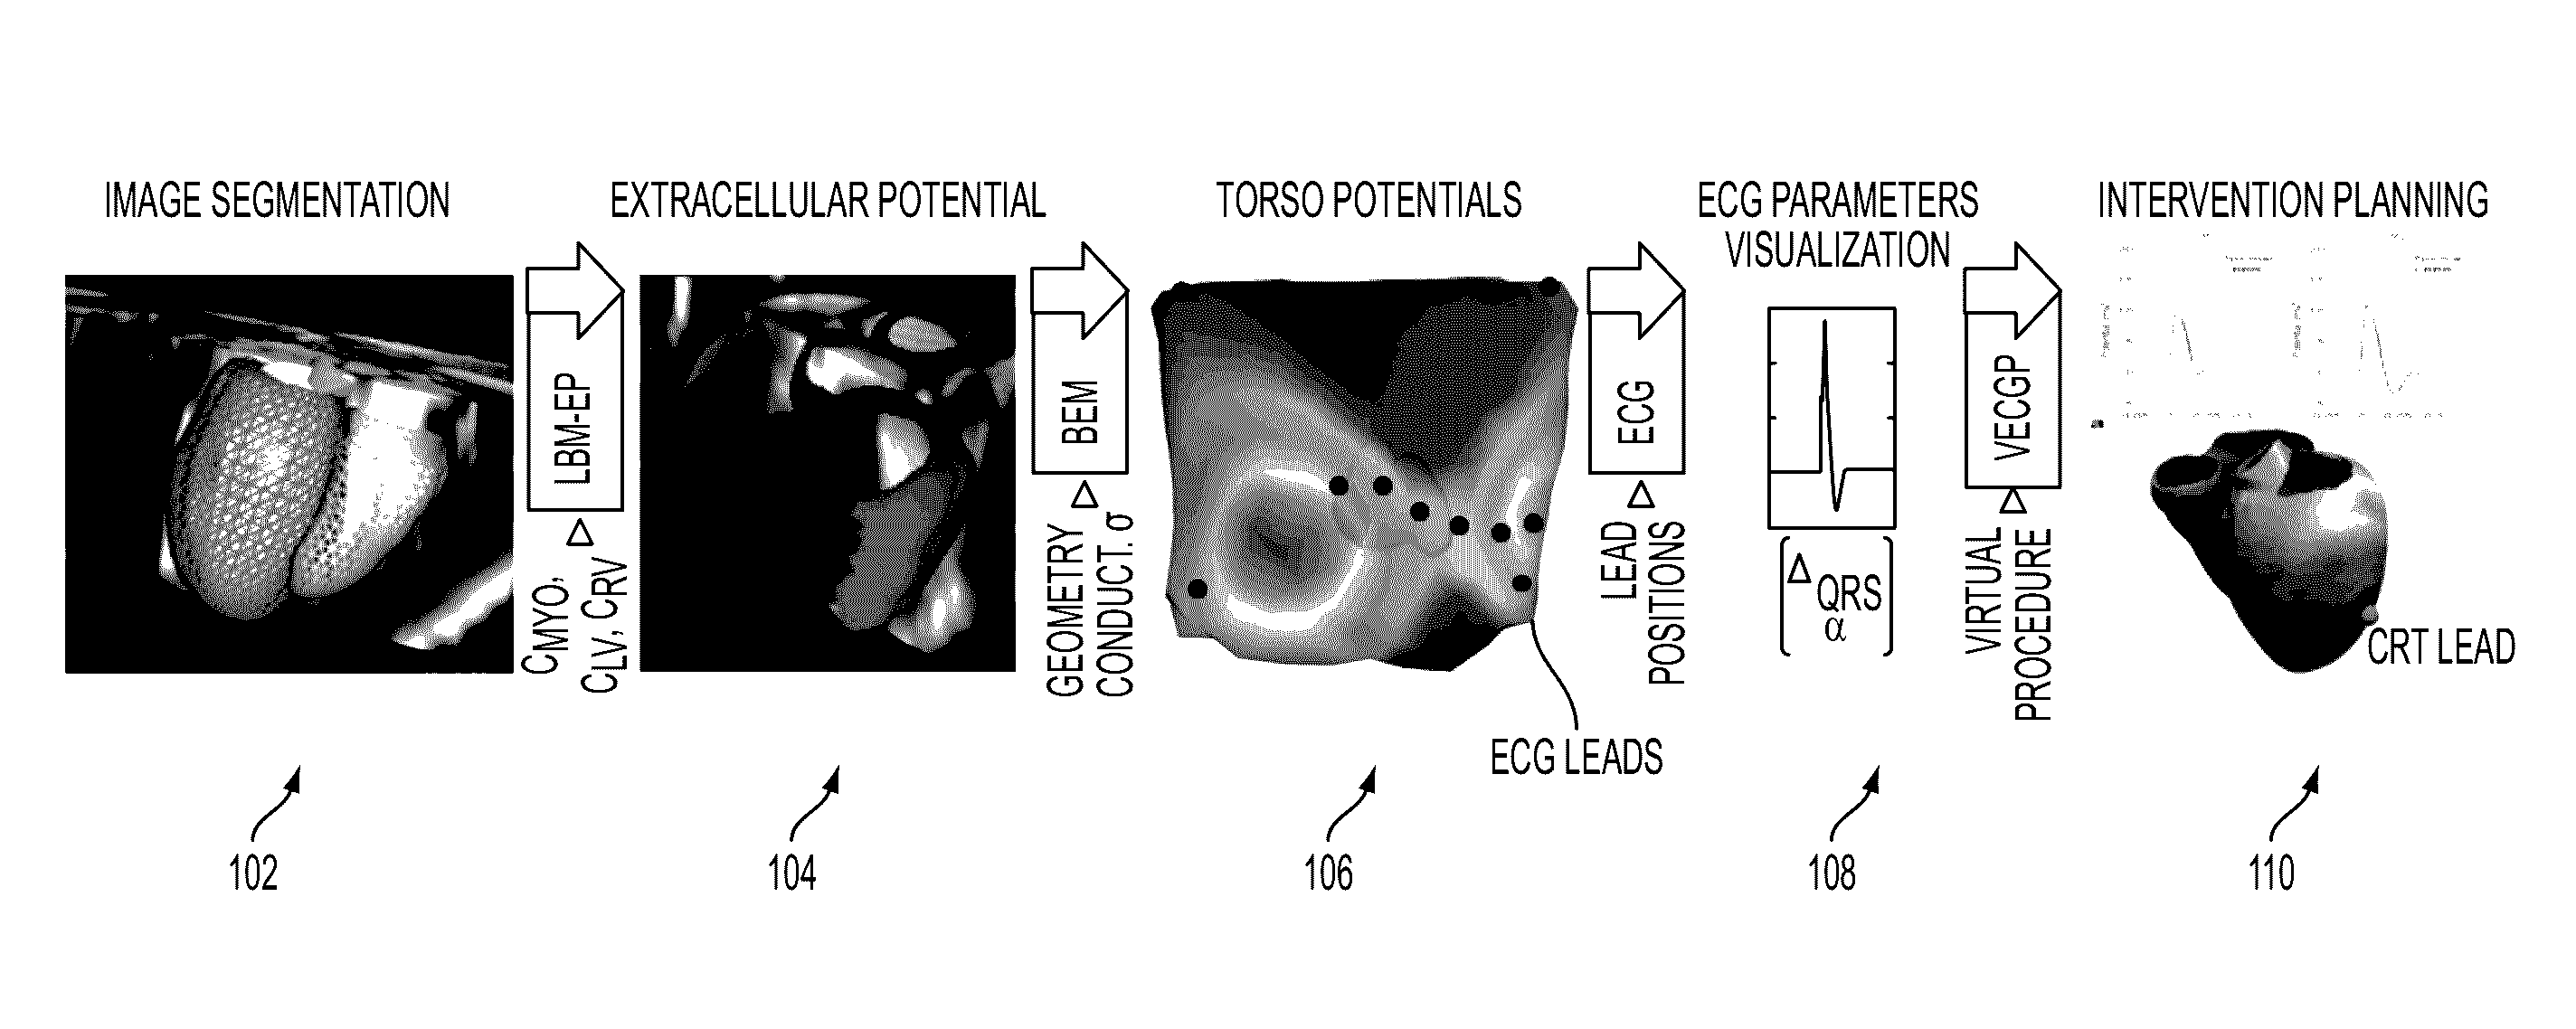 System and method for patient specific planning and guidance of electrophysiology interventions